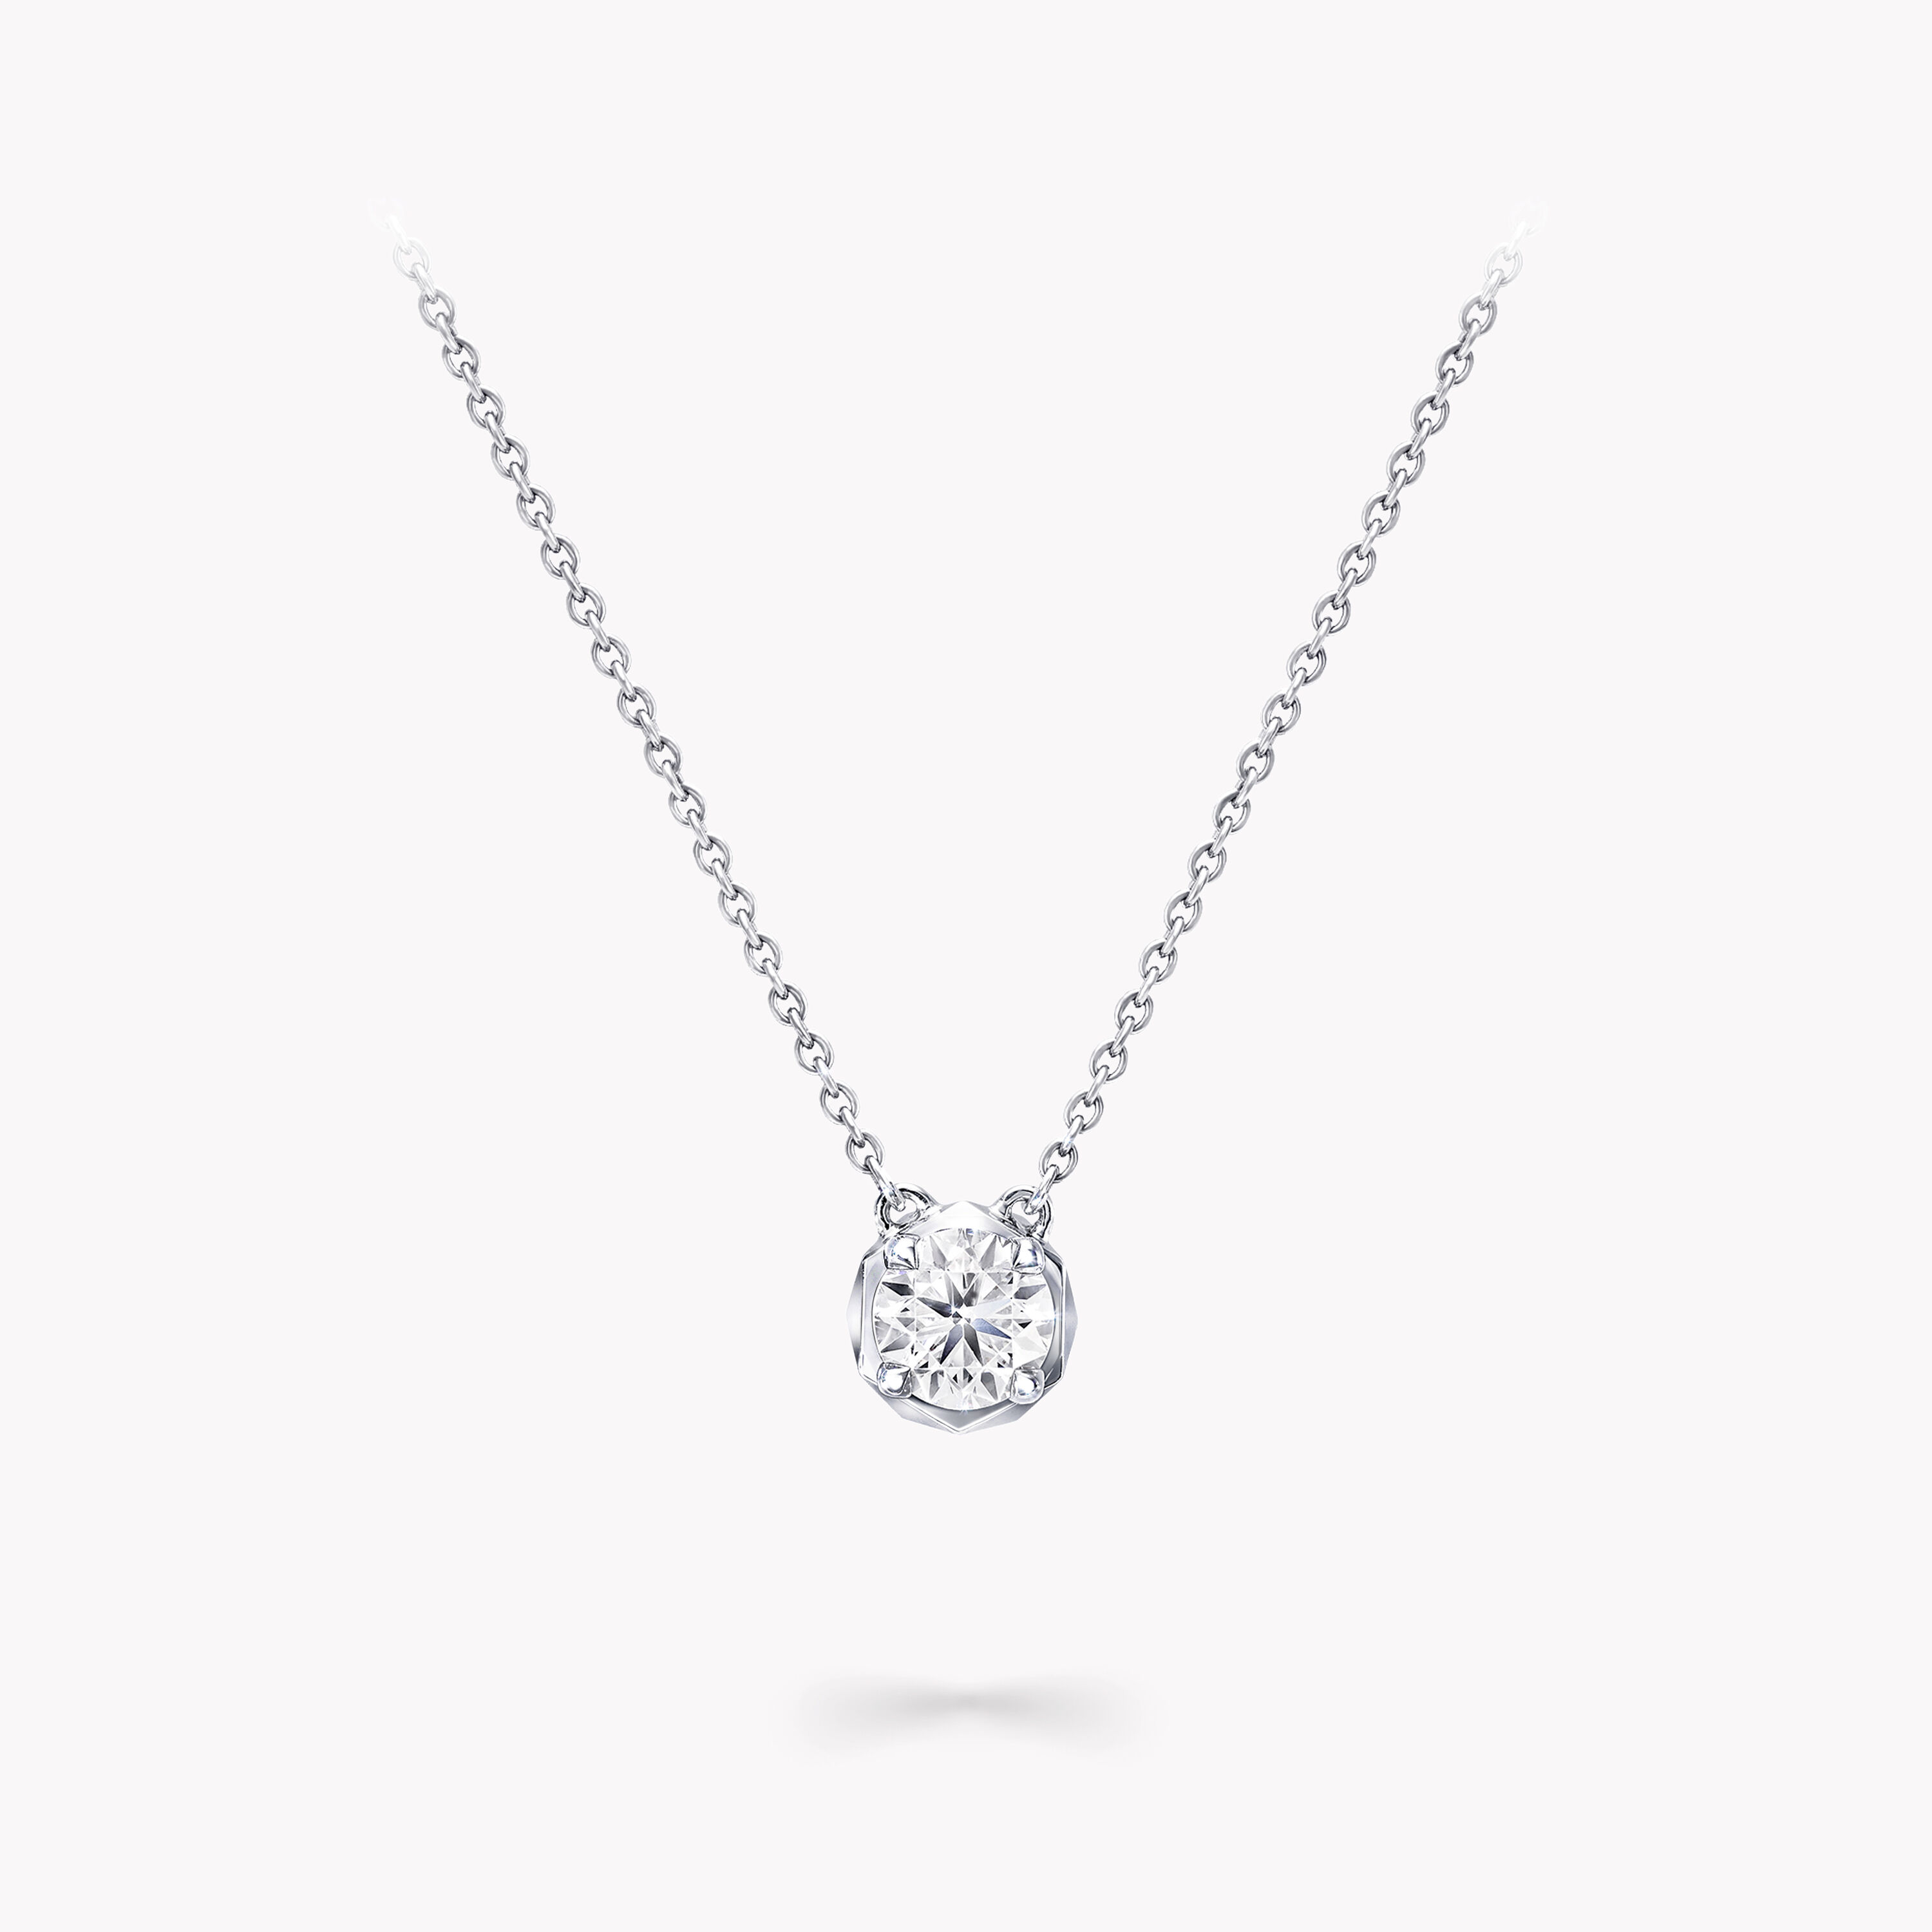 How to Buy the Perfect Diamond Necklace ? - The Caratlane